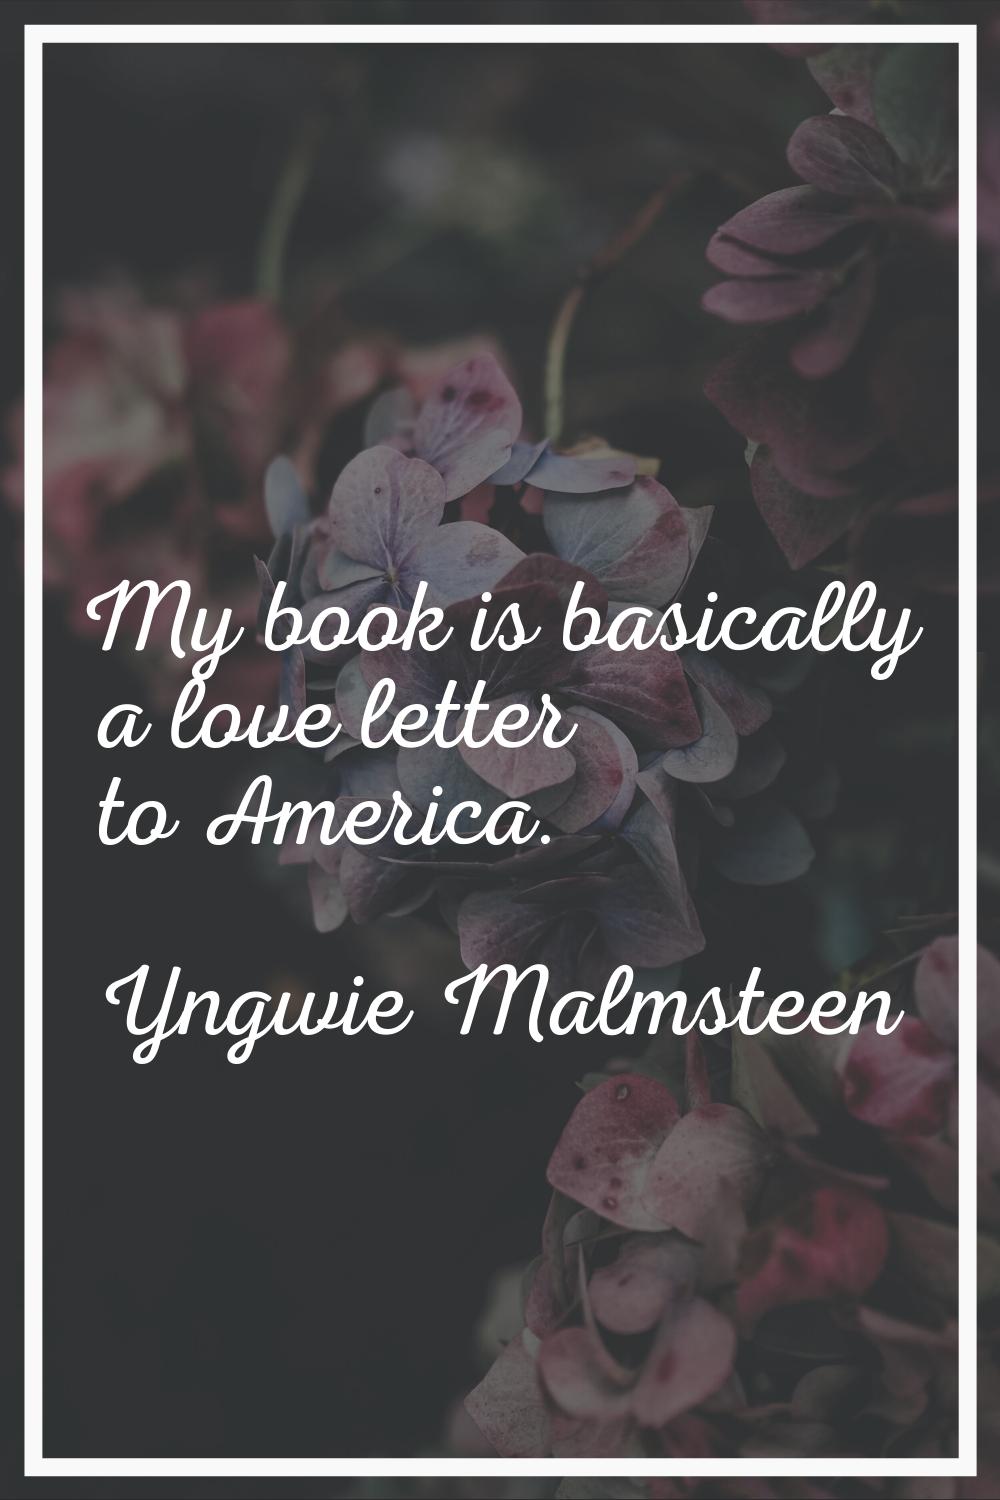 My book is basically a love letter to America.